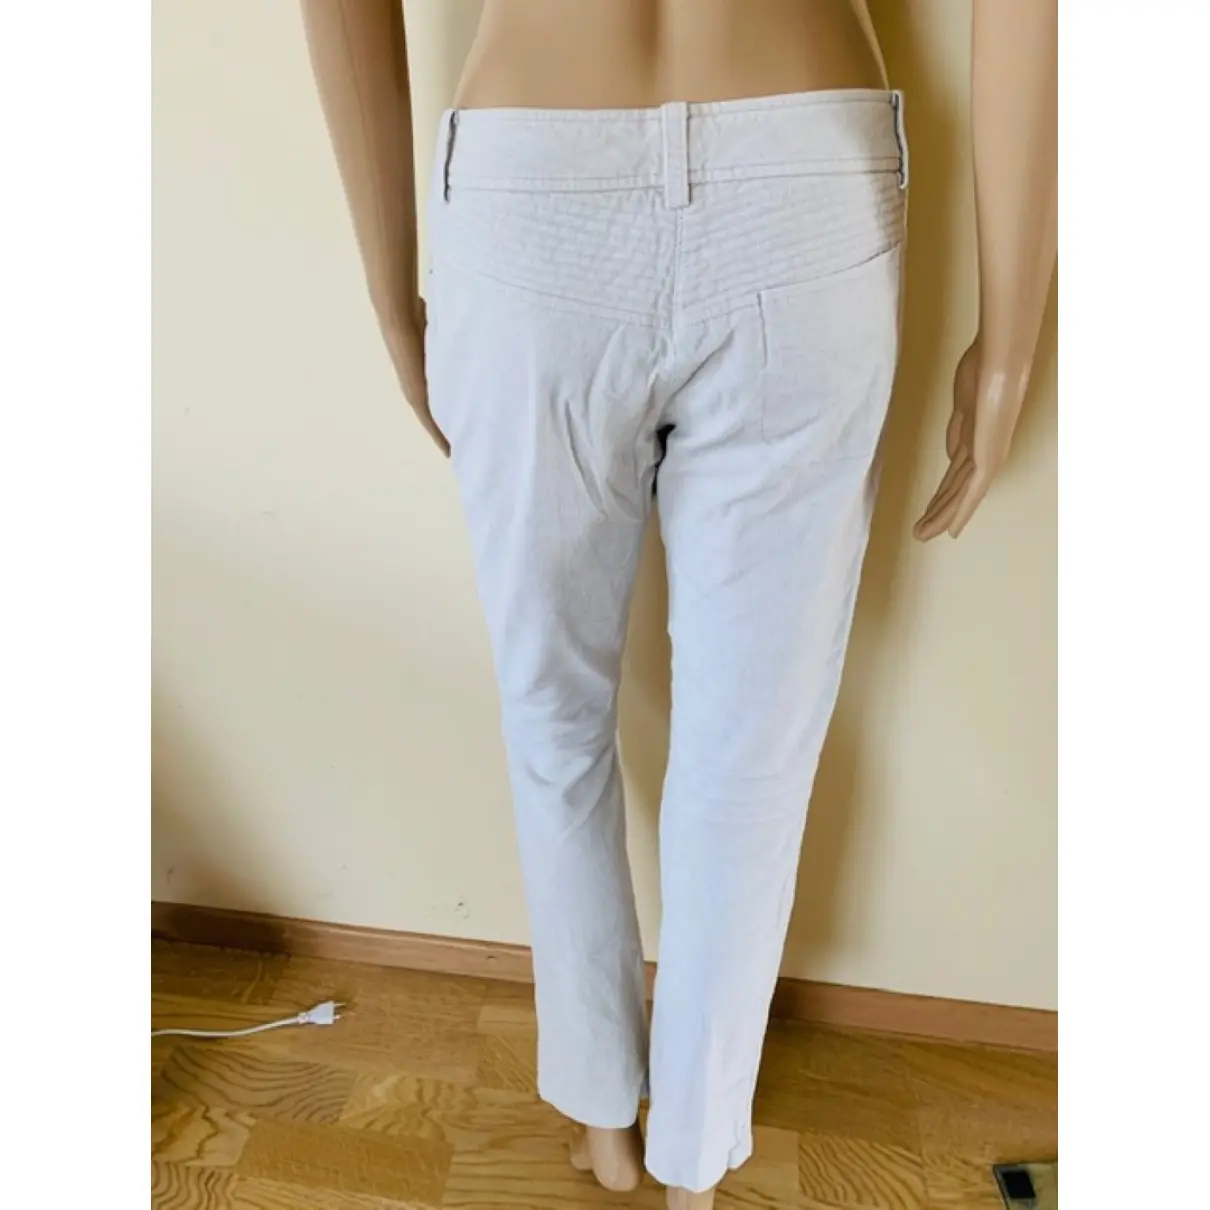 Buy Ermanno Scervino Trousers online